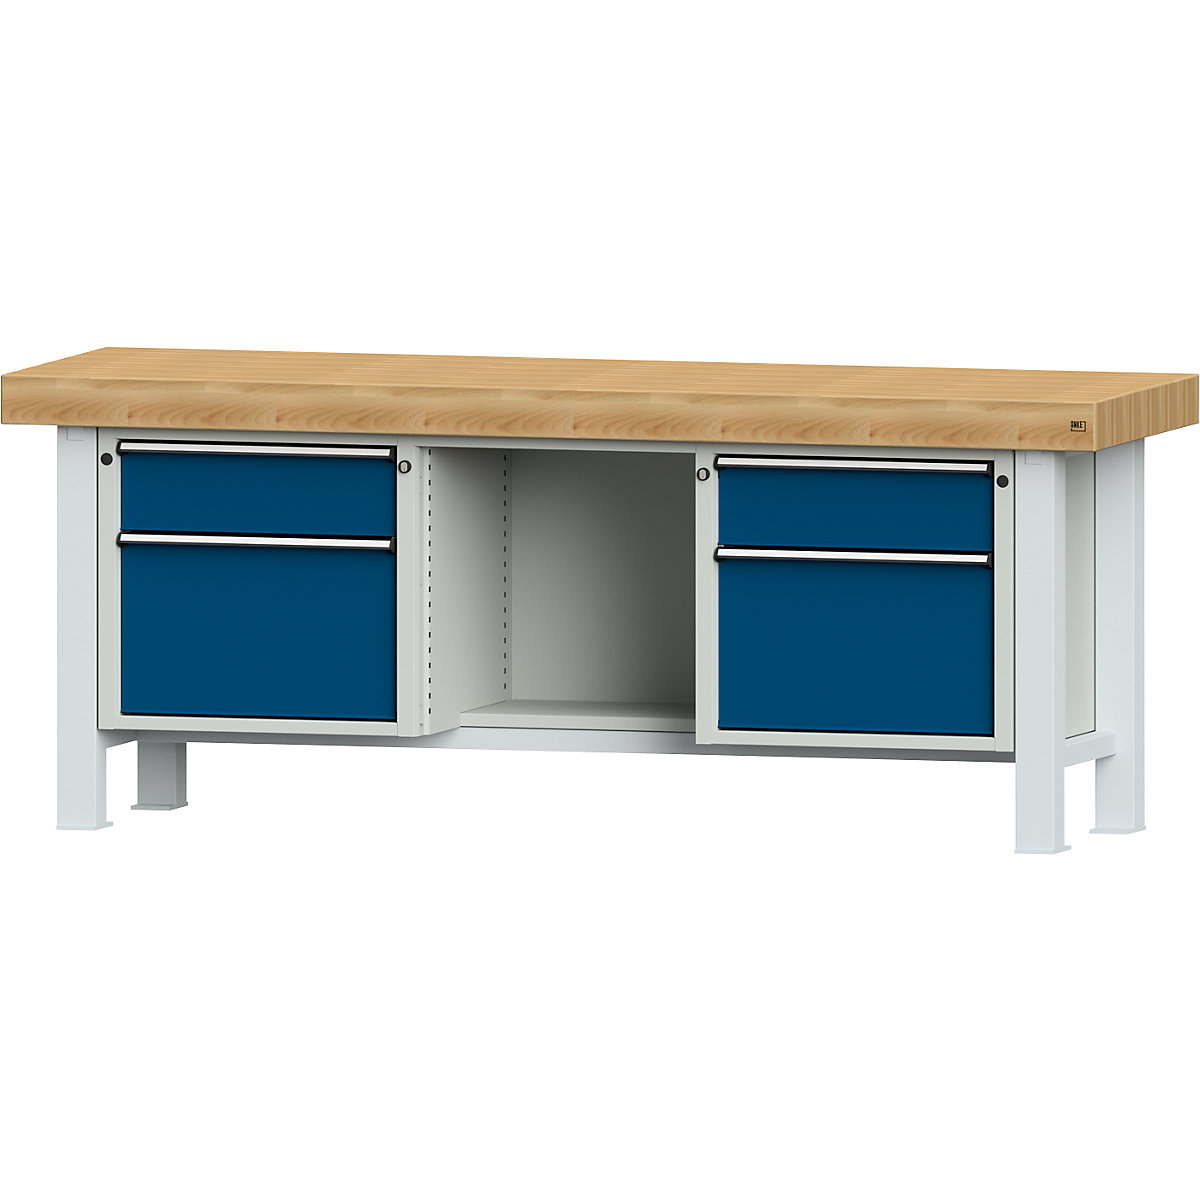 Heavy duty workbench – ANKE, worktop width 2250 mm, with 2 drawers and 2 hinged doors, 1 open compartment, worktop thickness 100 mm-8